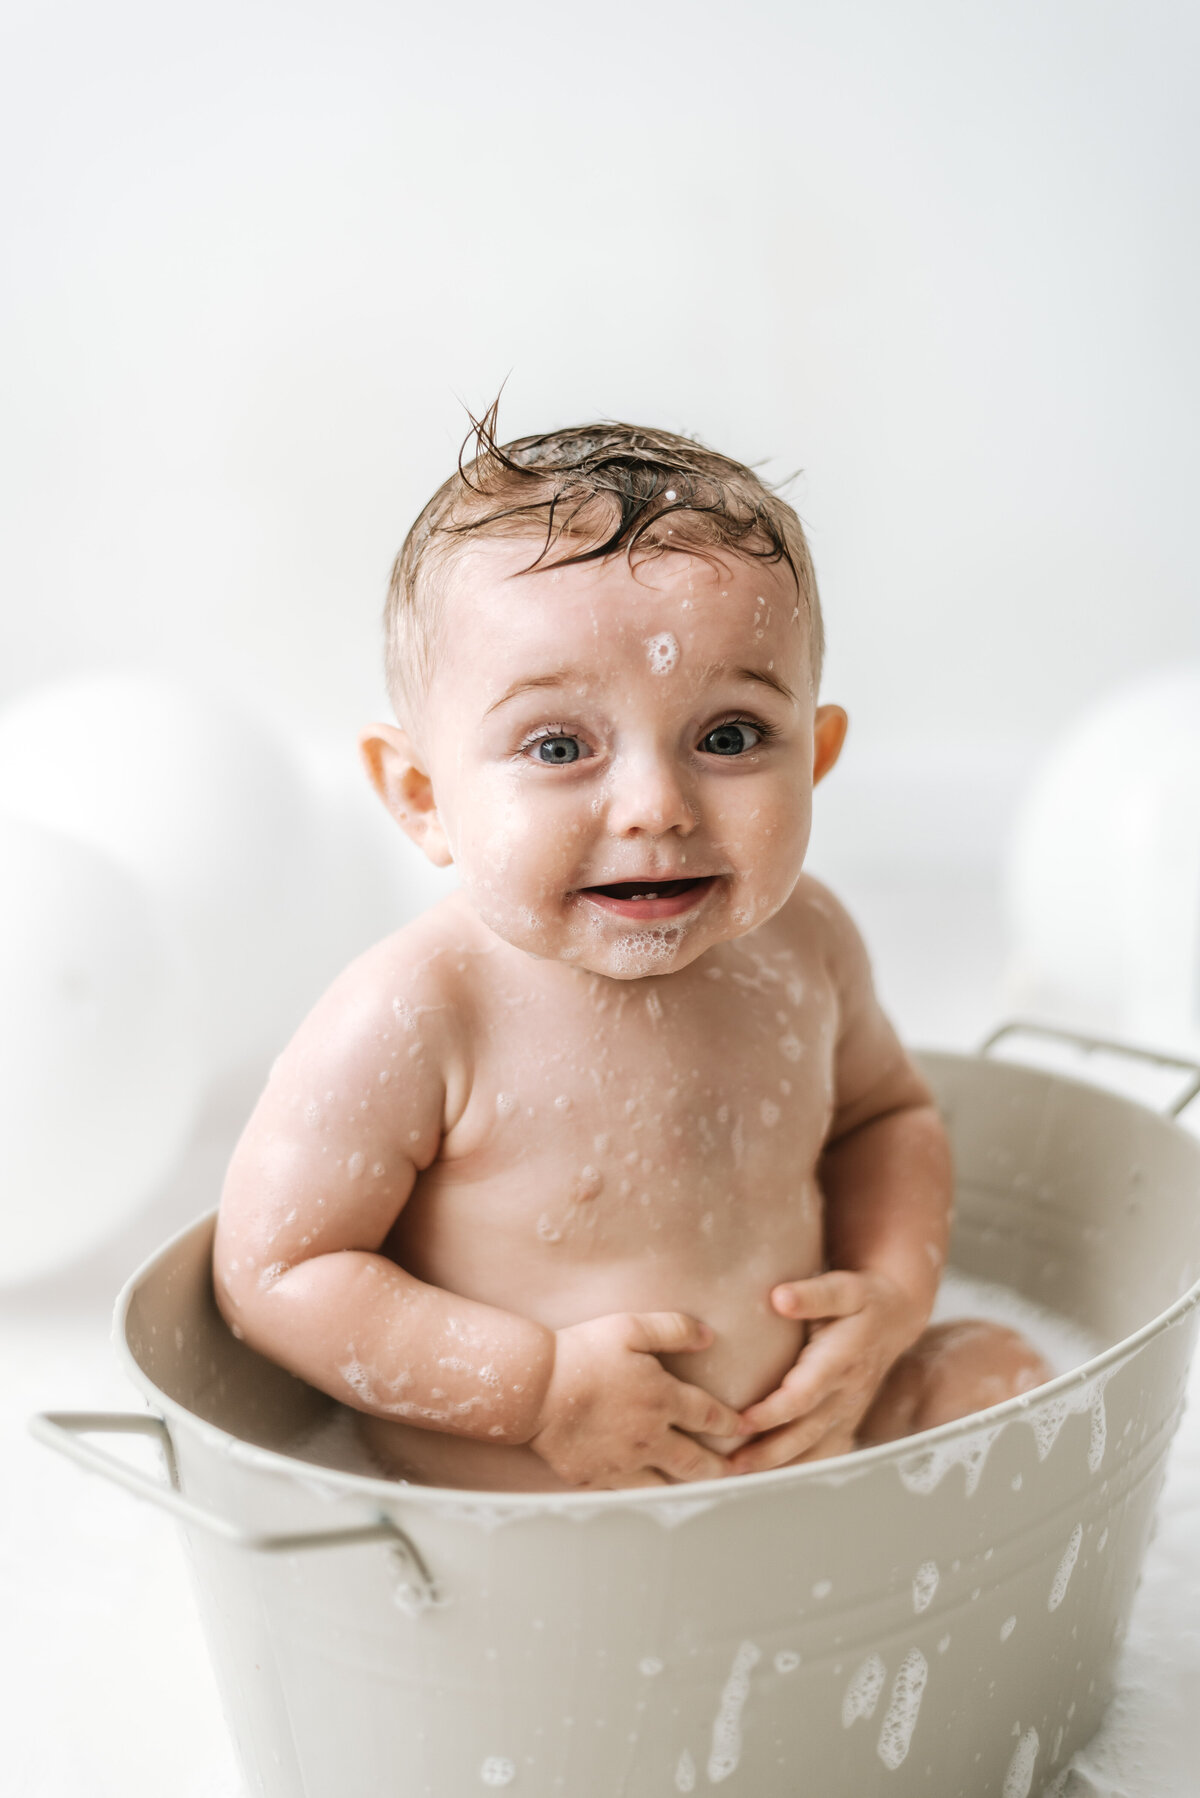 Baby boy in a bubble bath at cake smash photoshoot in Billingshurst